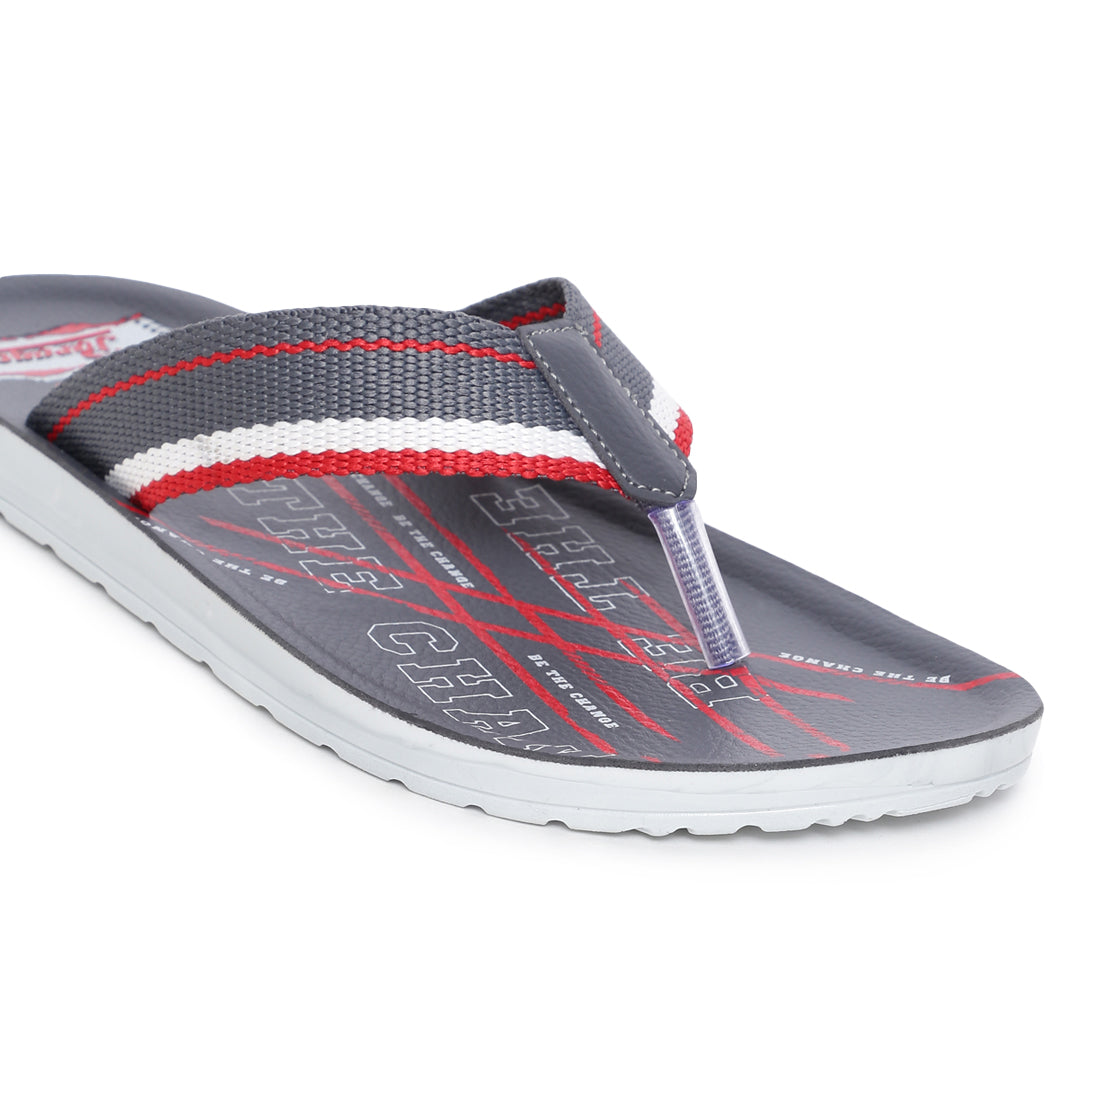 Paragon  PUK2209G Men Stylish Sandals | Comfortable Sandals for Daily Outdoor Use | Casual Formal Sandals with Cushioned Soles